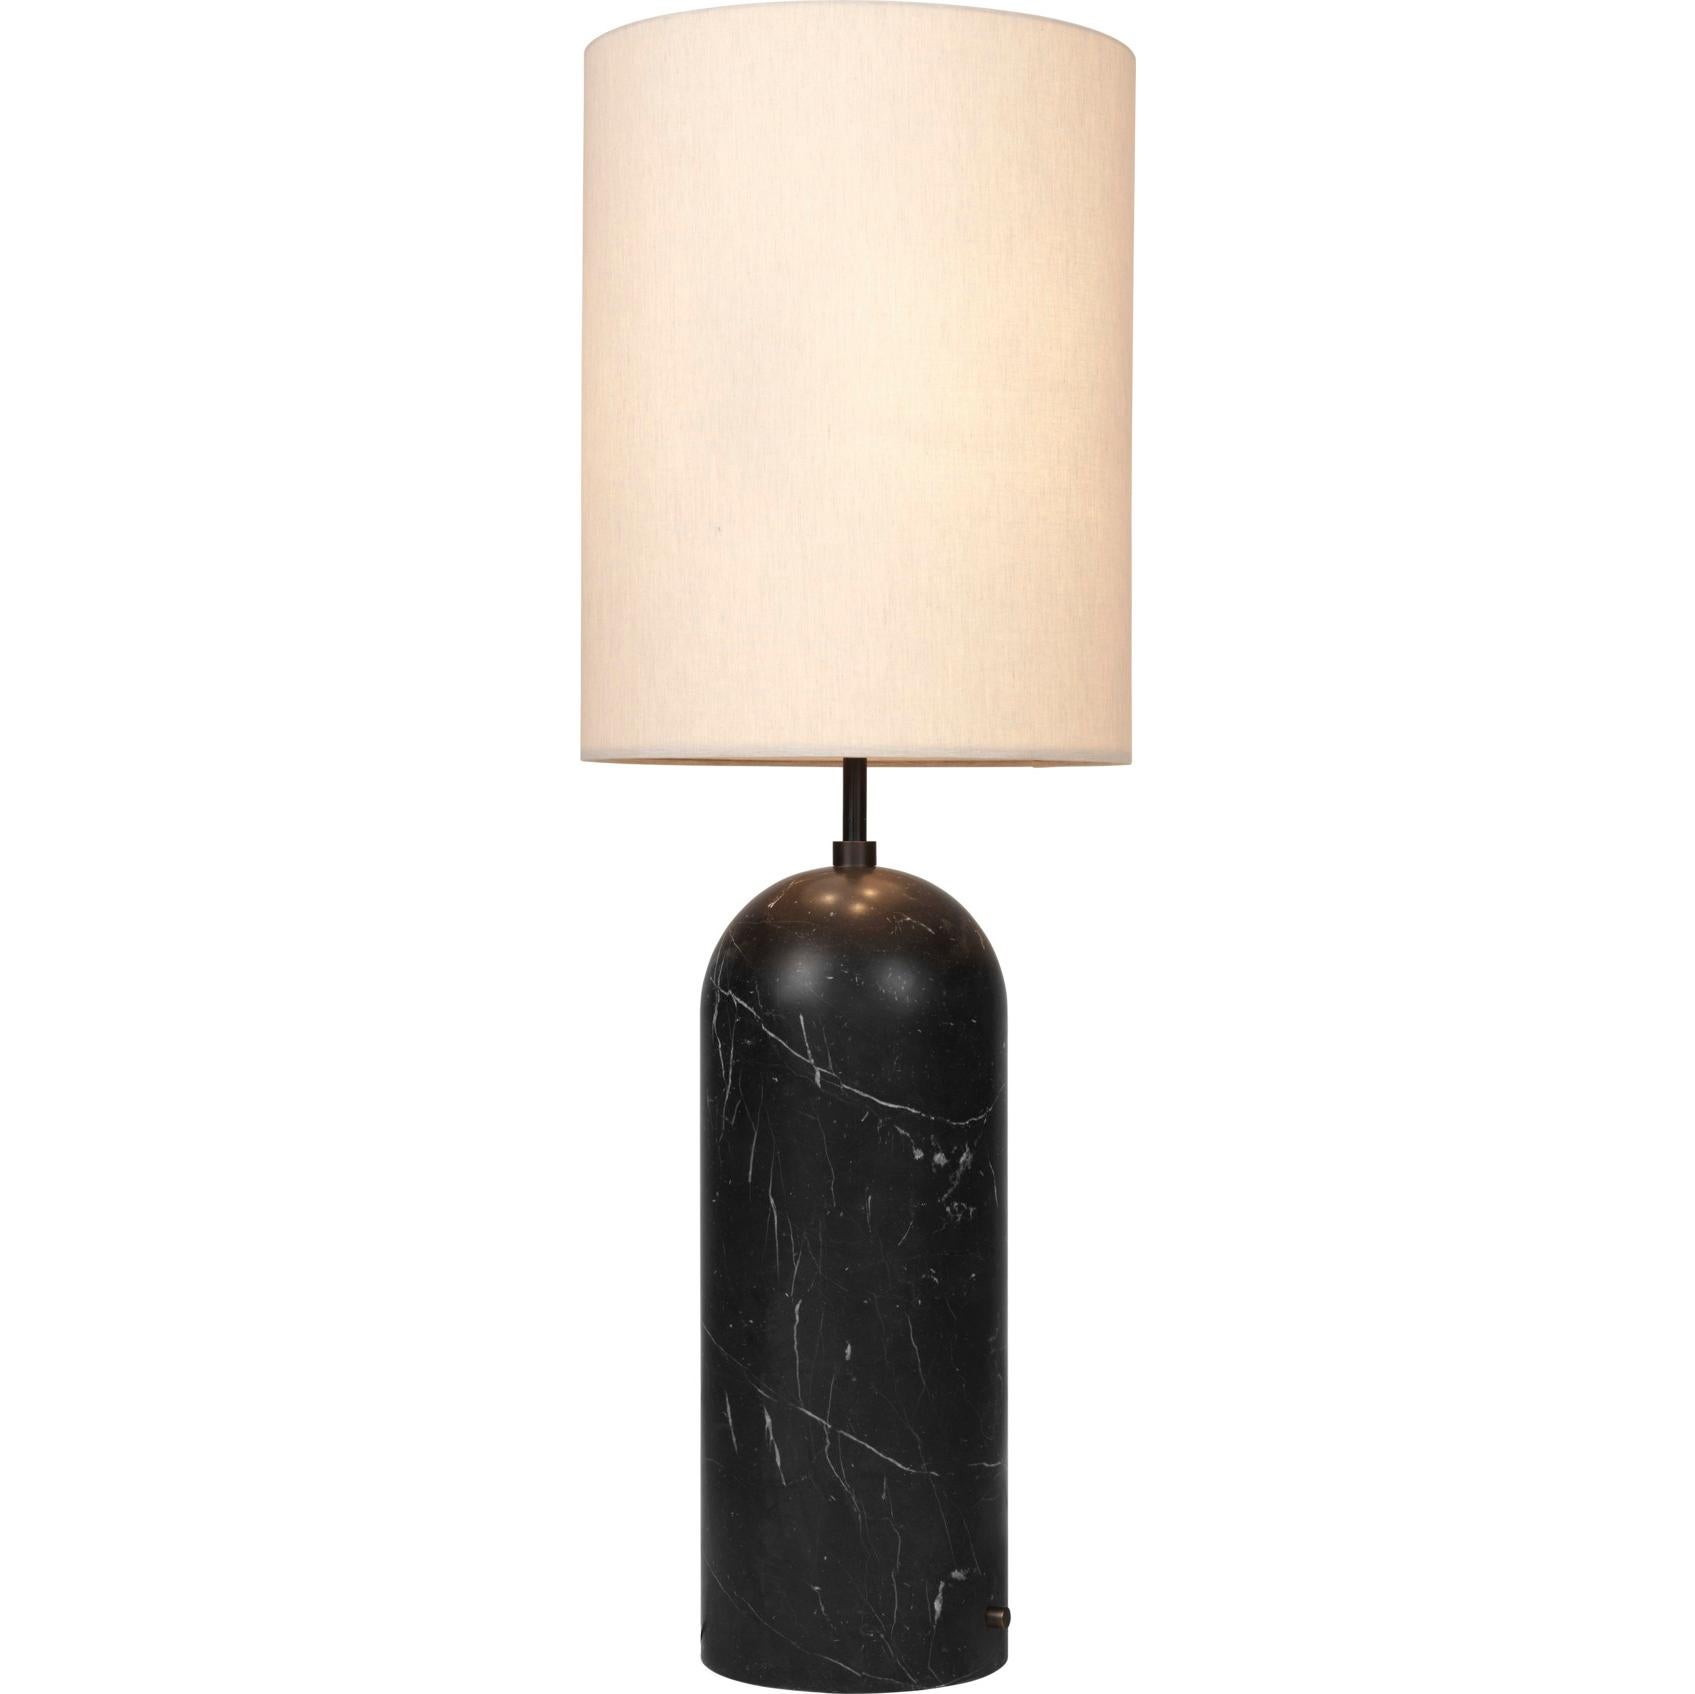 Scandinavian Modern 'Gravity XL High' Floor Lamp for Gubi in Black Marble with Canvas Shade For Sale